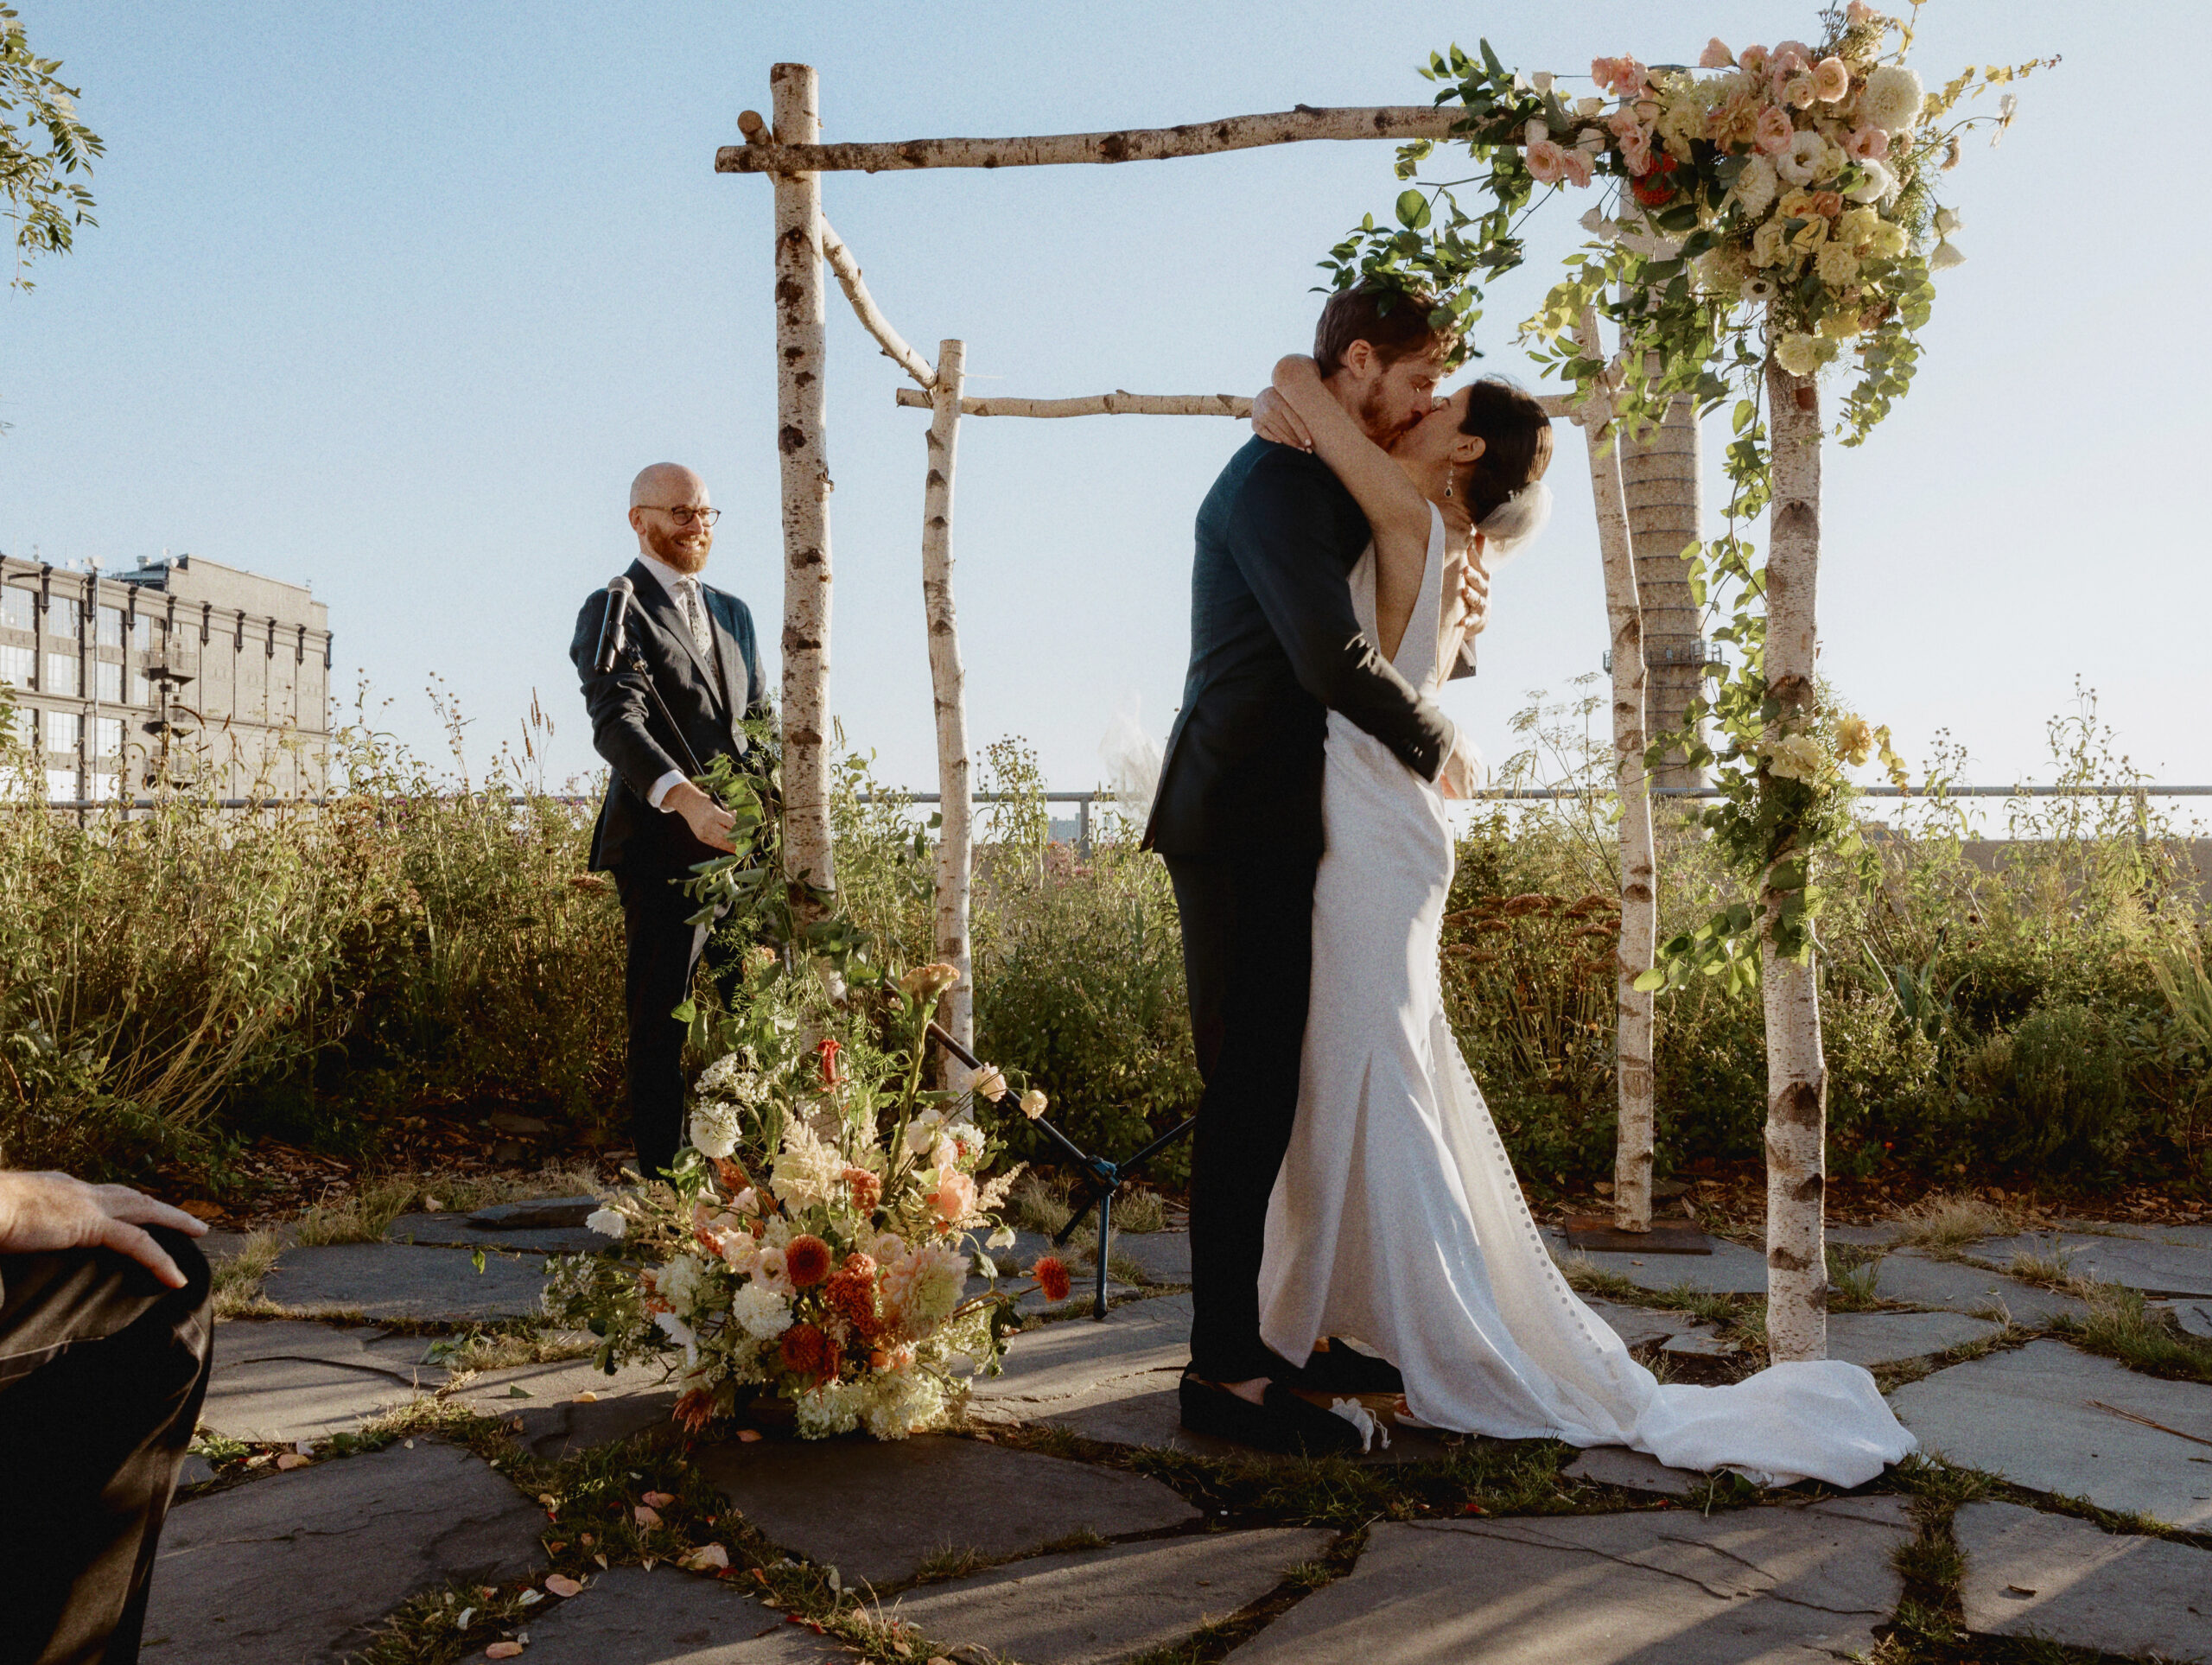 The bride and groom are kissing each other after the wedding ceremony at The Brooklyn Grange. Luxury wedding photography by Jenny Fu Studio